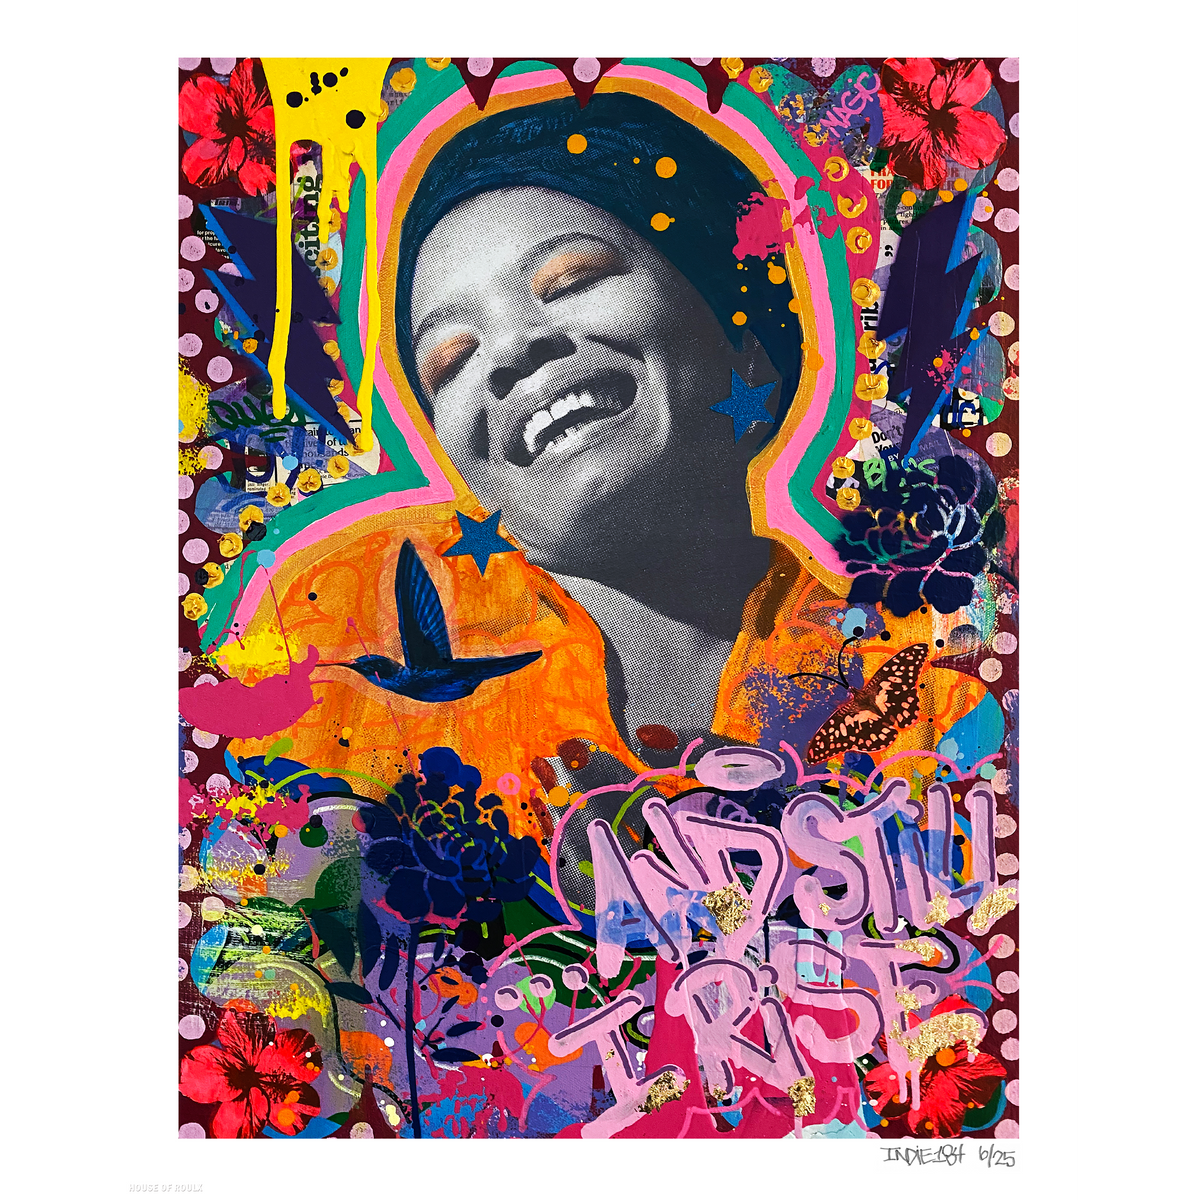 Indie 184 &quot;And Still I Rise (Maya Angelou)&quot; - Archival Print, Limited Edition of 20 - 16 x 20&quot;